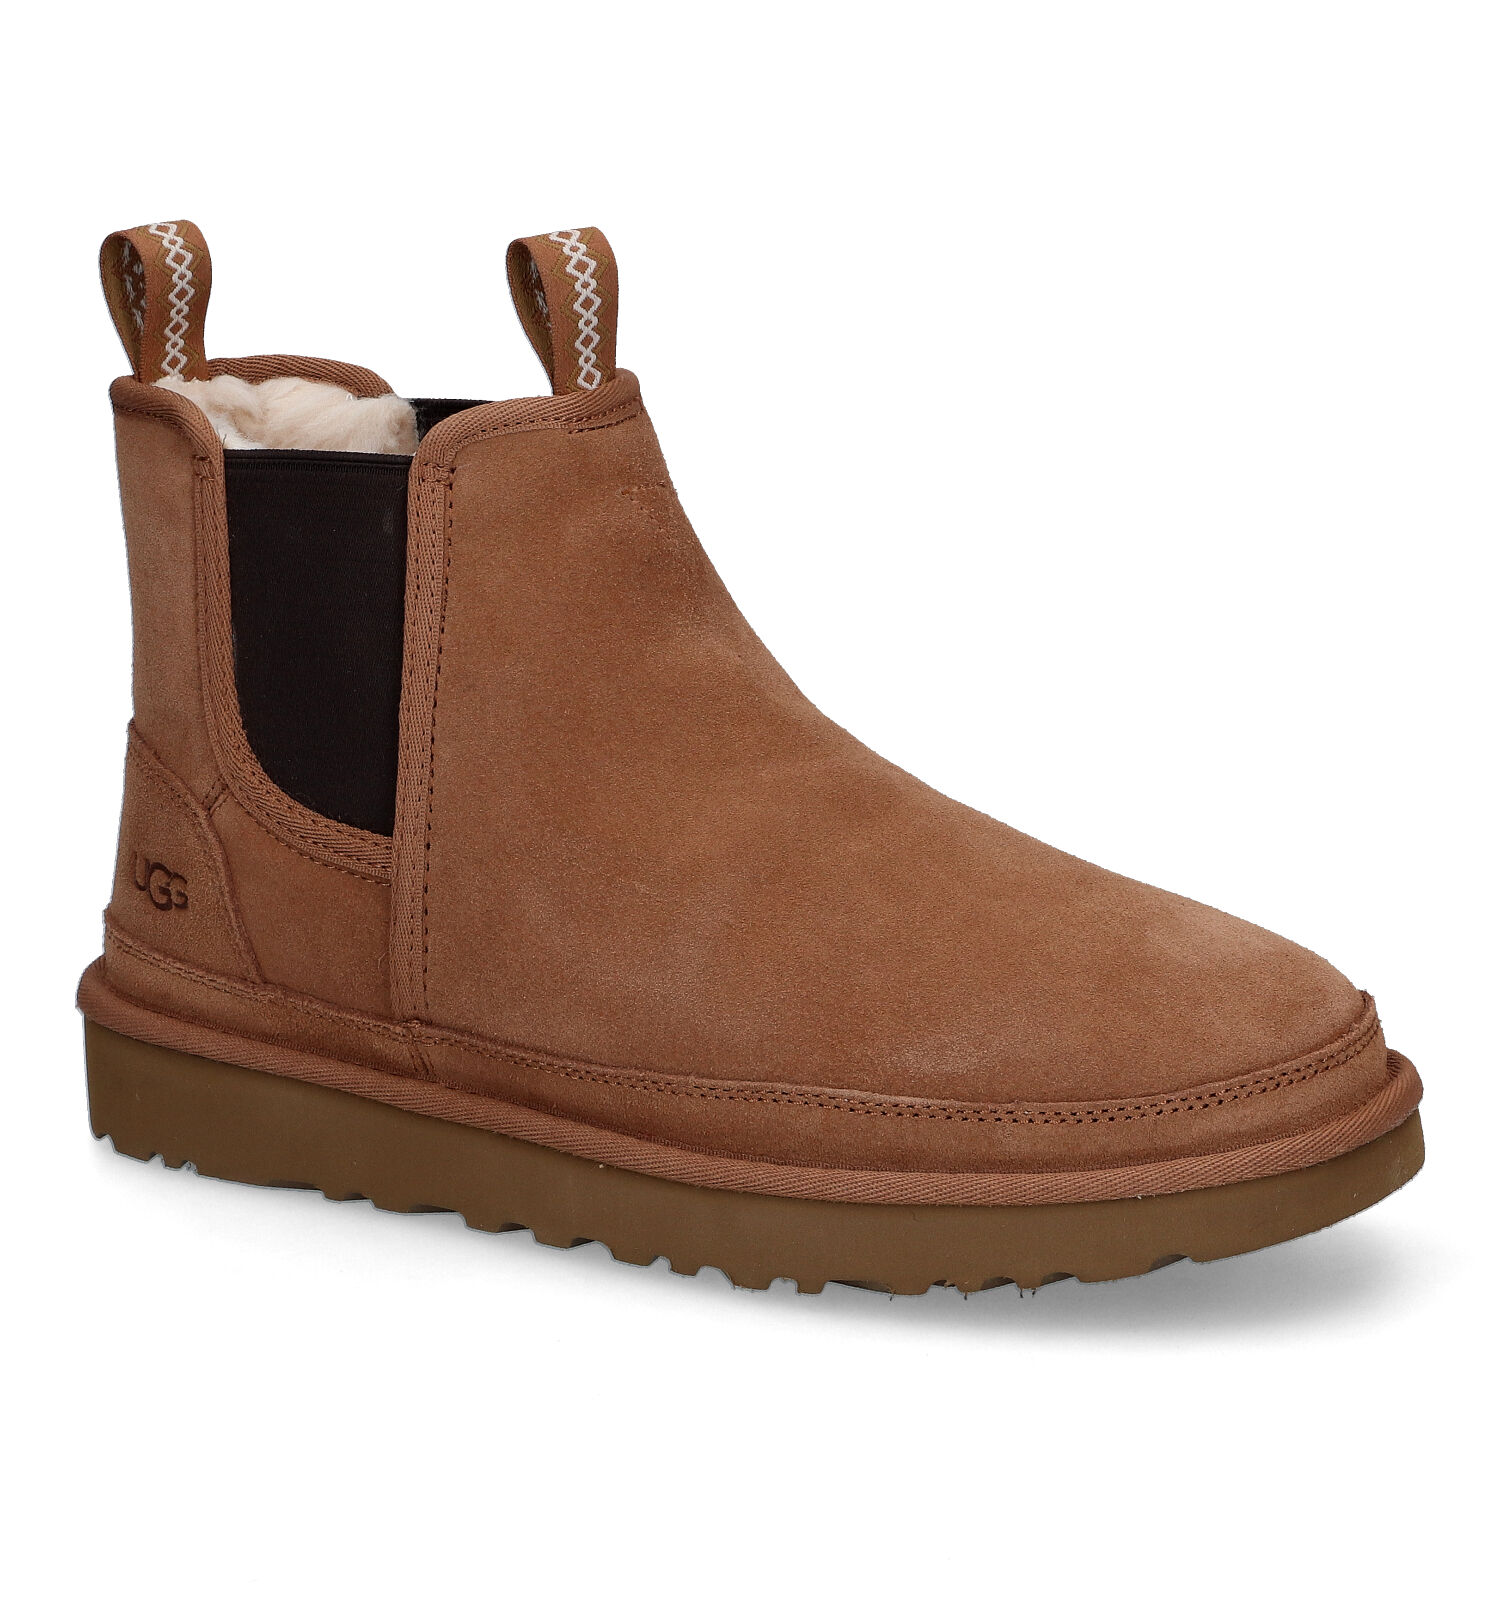 nevel Lol Oh UGG Neumel Chelsea Bruine Boots Snowboots | TORFS.BE